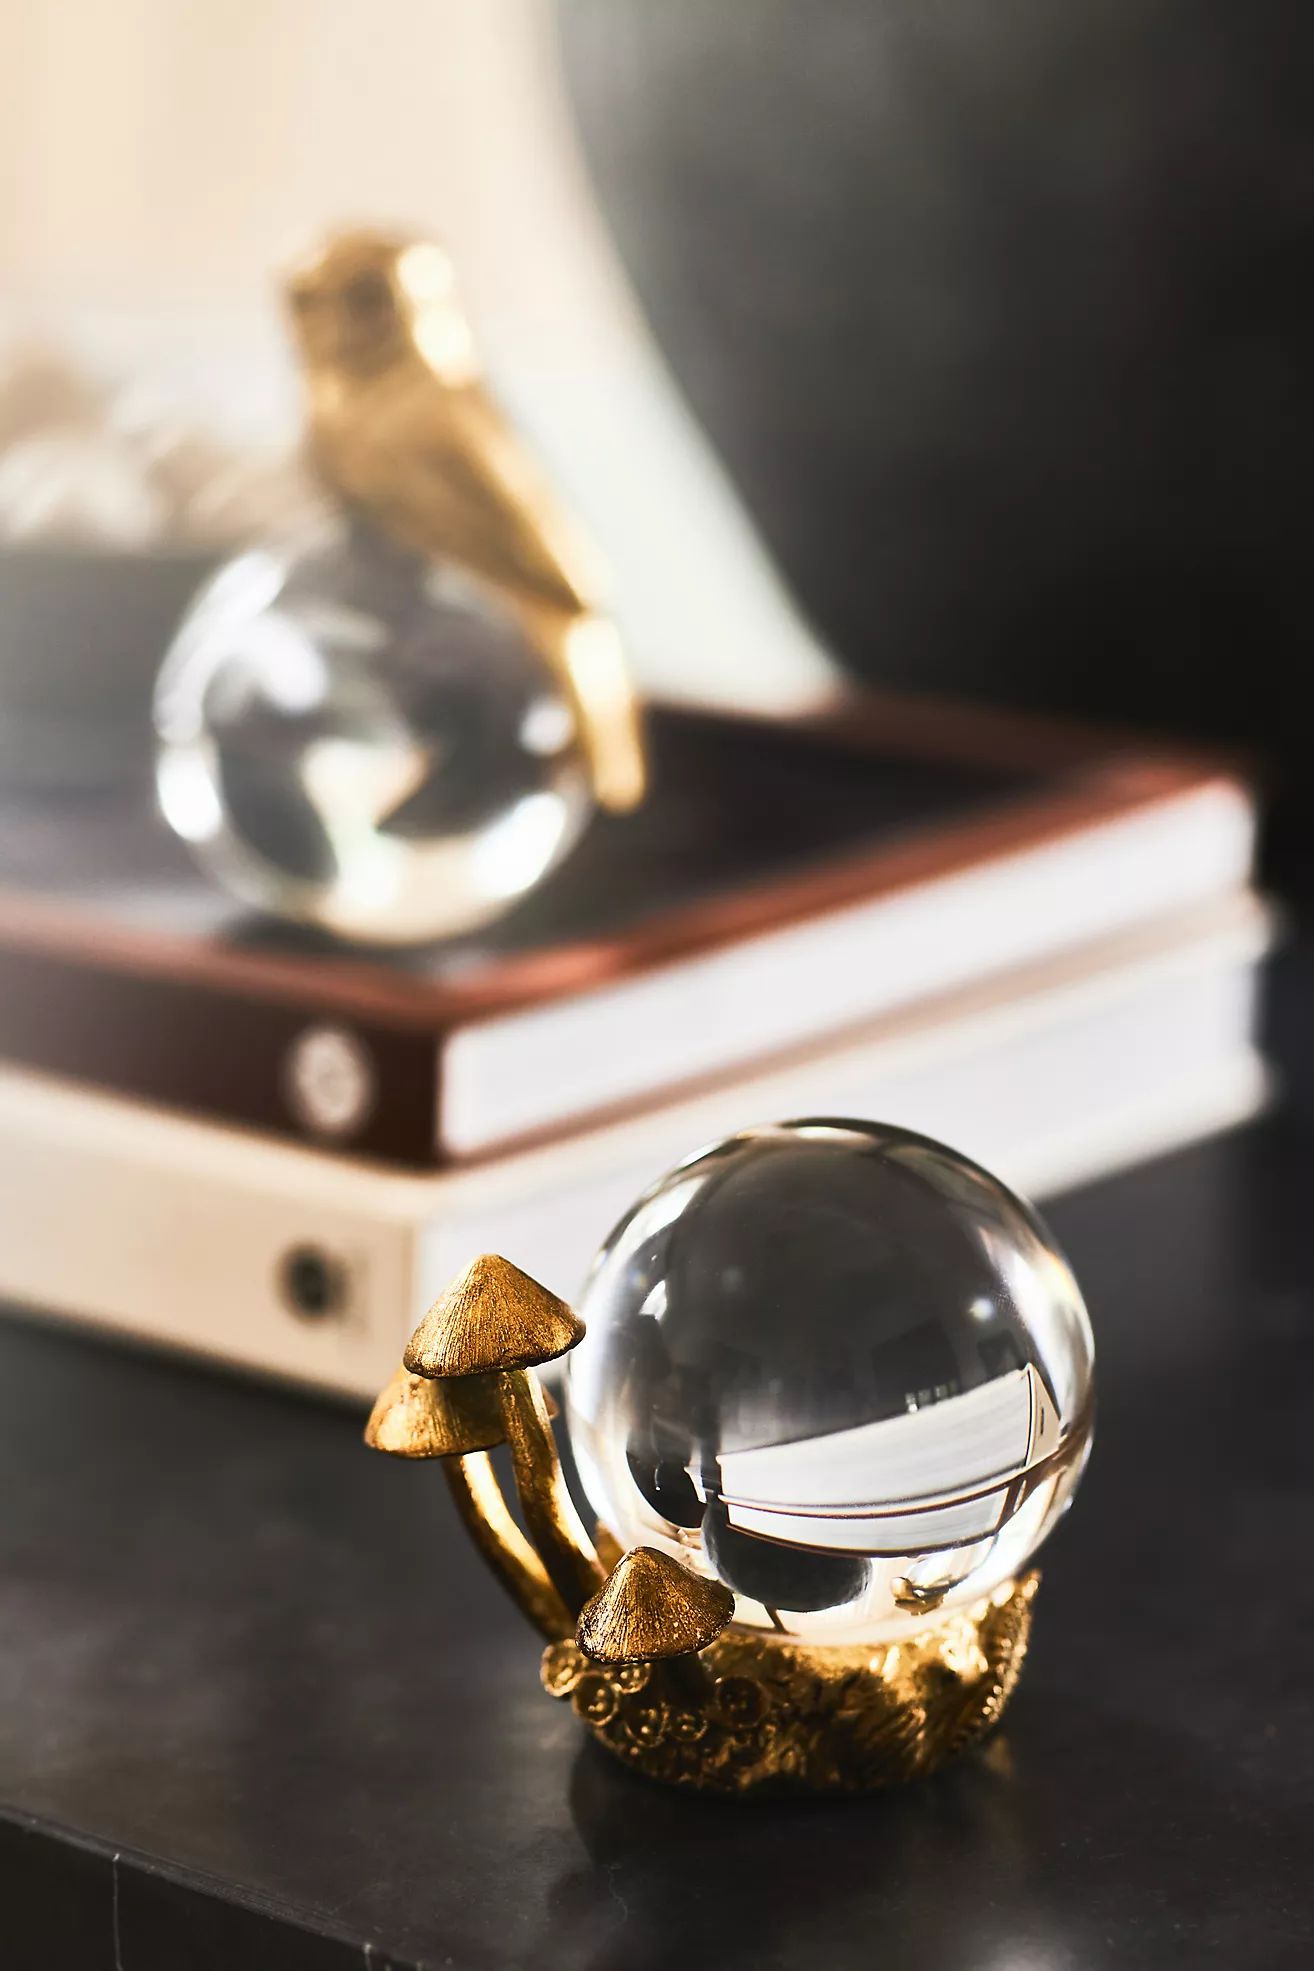 Charlotte Woodland Crystal Ball Decorative Object | Anthropologie (US)